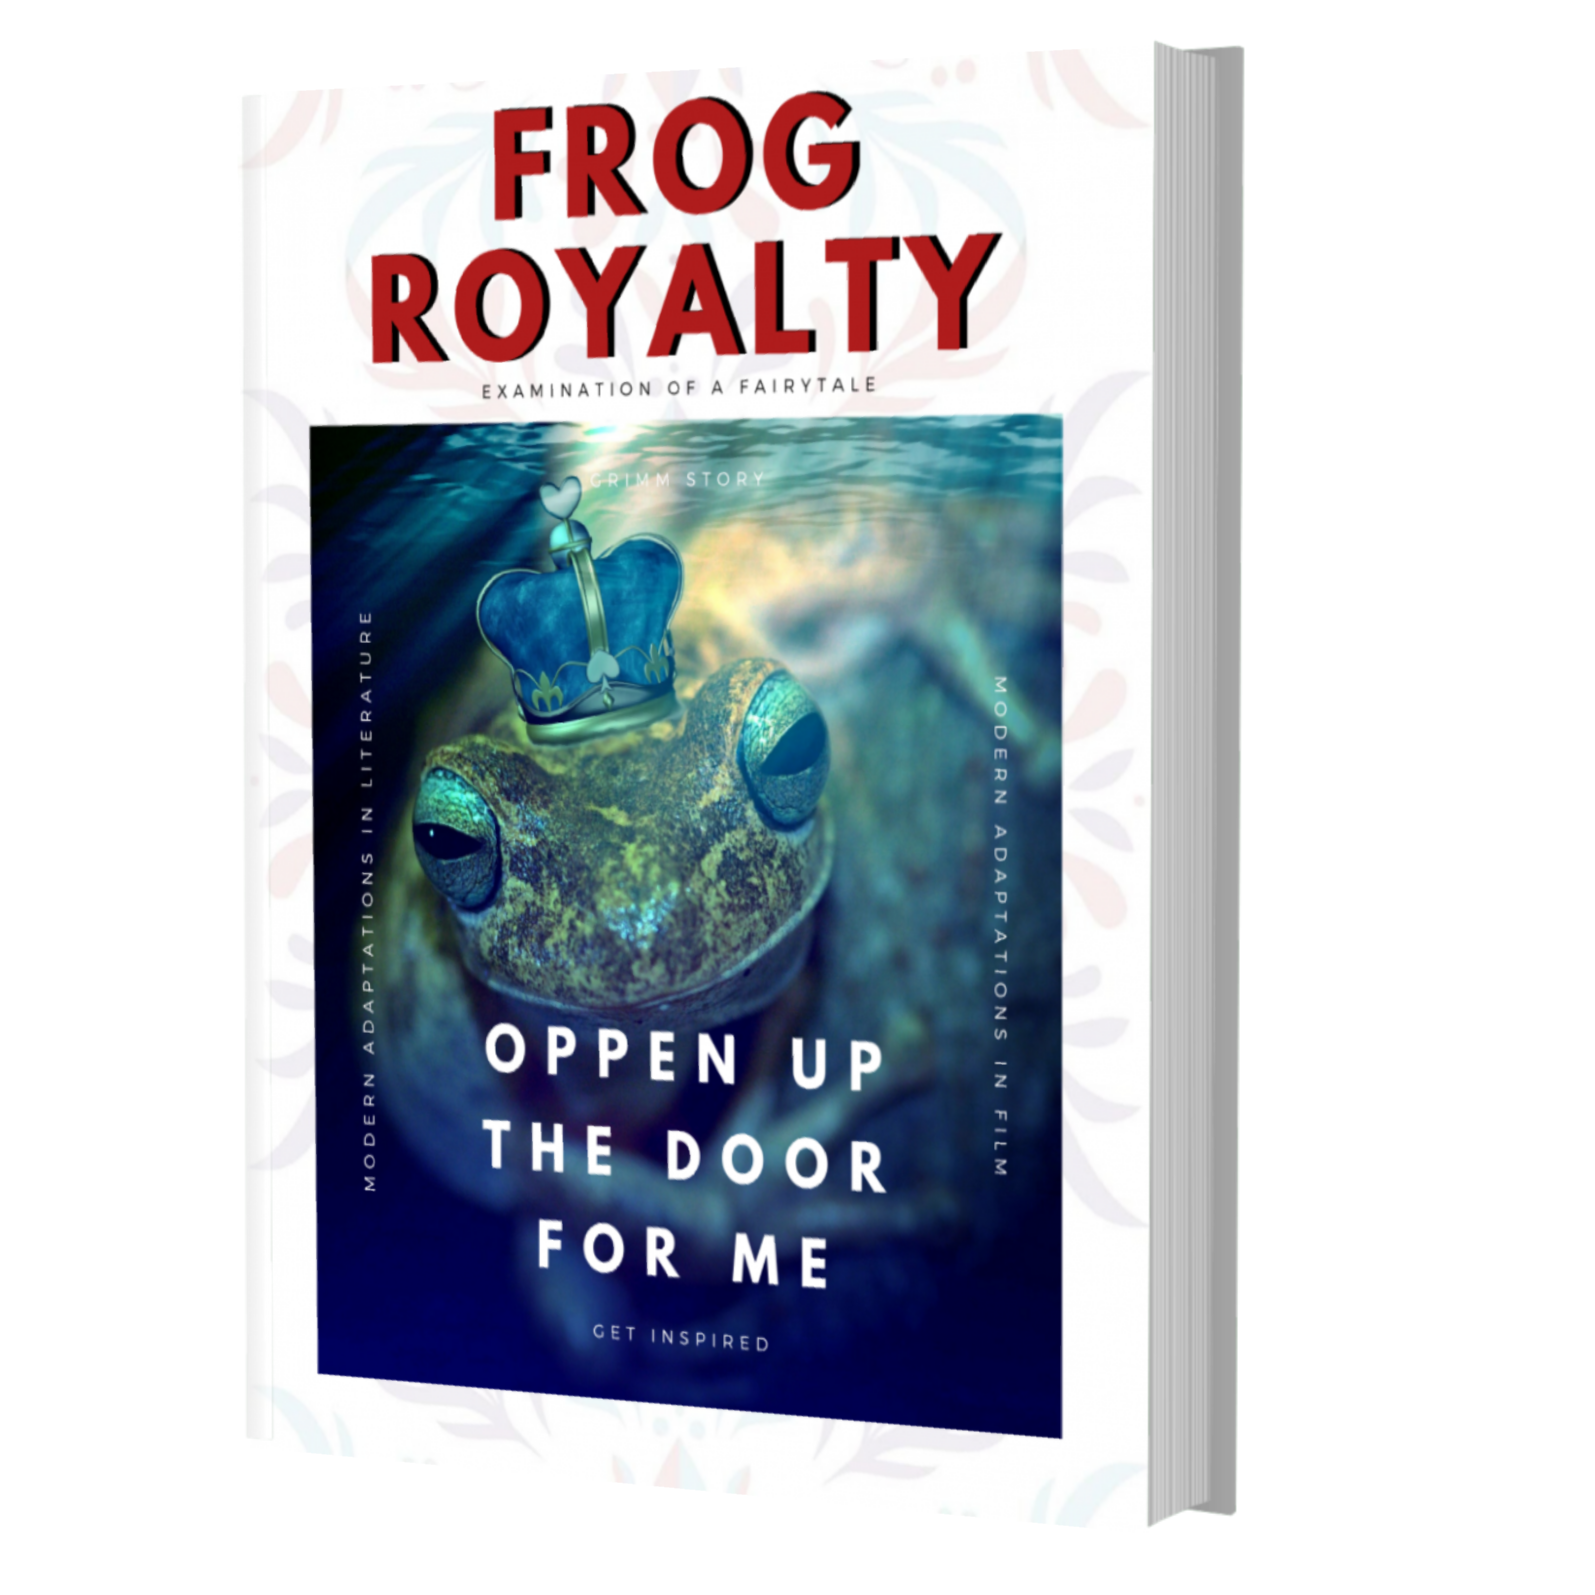 A mock book cover for the Frog Royalty examinations of a fairytale ebook